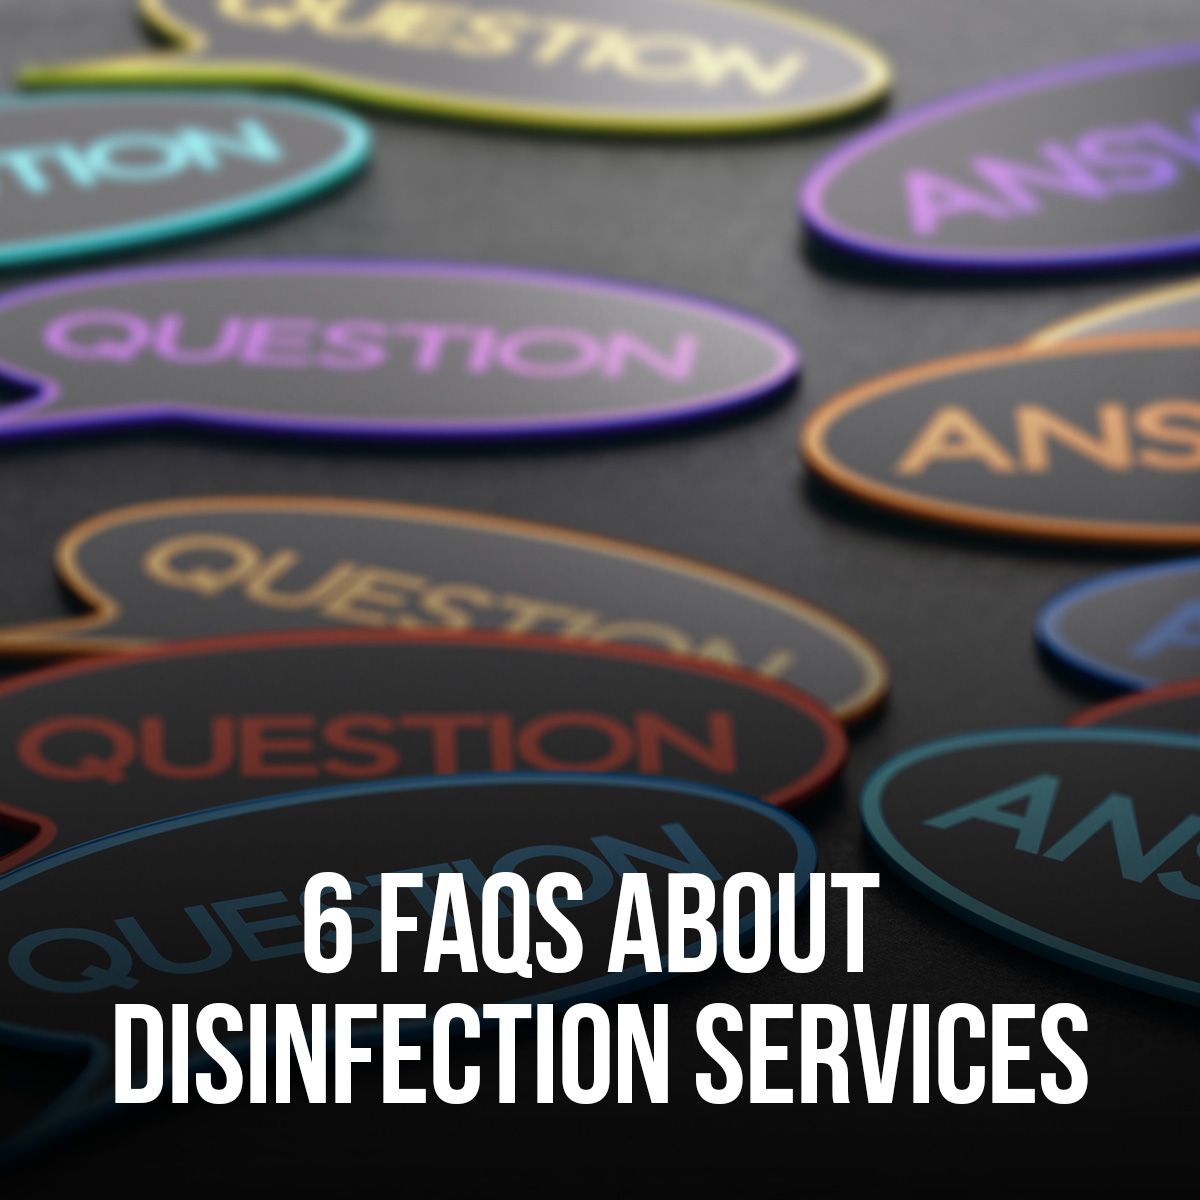 6 FAQS ABOUT DISINFECTION SERVICES